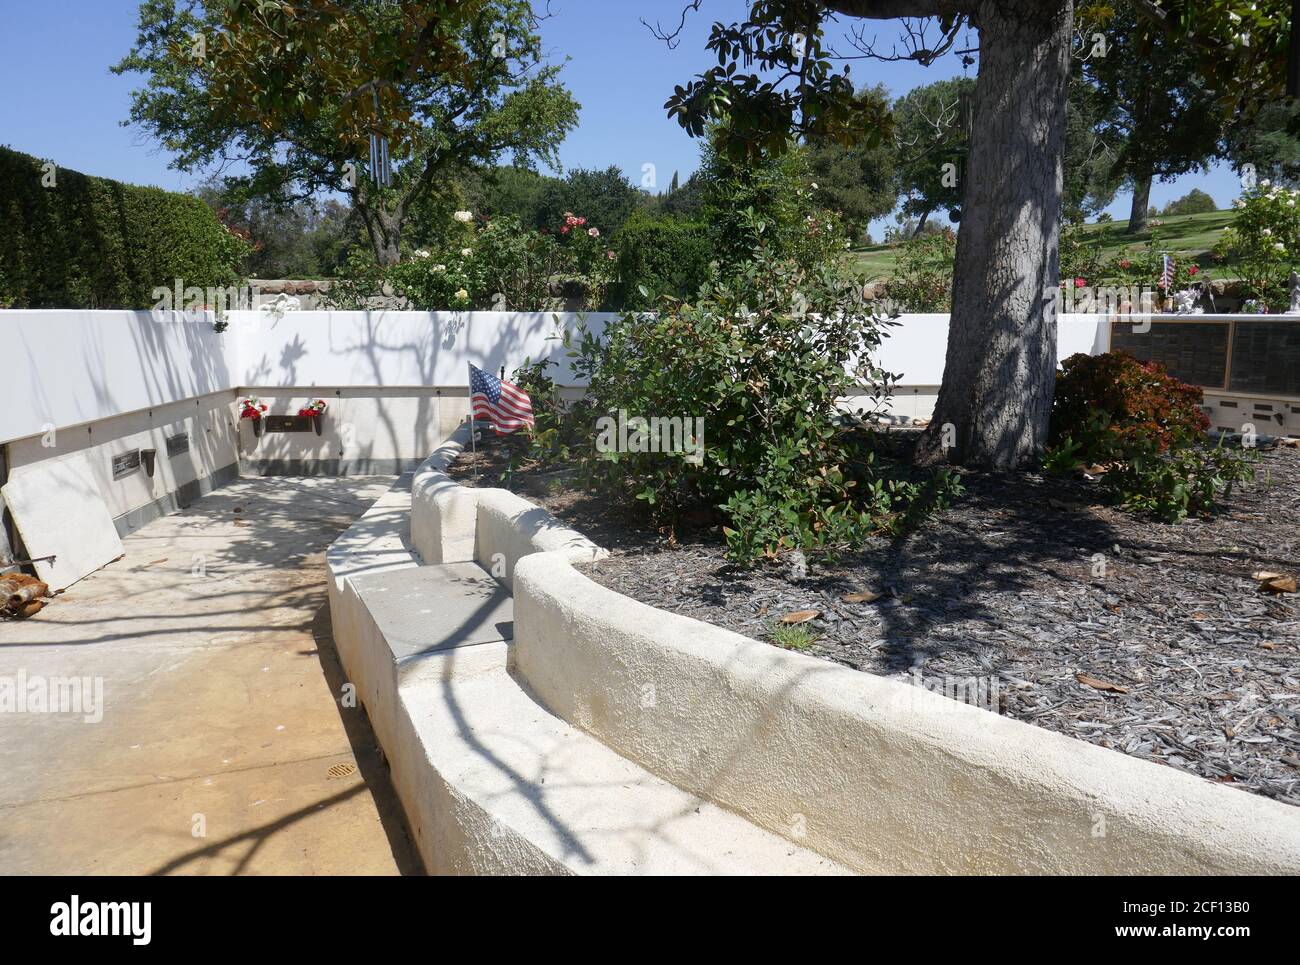 Westlake Village, California, USA 2nd September 2020 A general view of atmosphere of George O'Hanlon Grave (unmarked, ashes scattered here) at Pierce Brothers Valley Oaks Memorial Park on September 2, 2020 in Westlake Village, California, USA. Photo by Barry King/Alamy Stock Photo Stock Photo